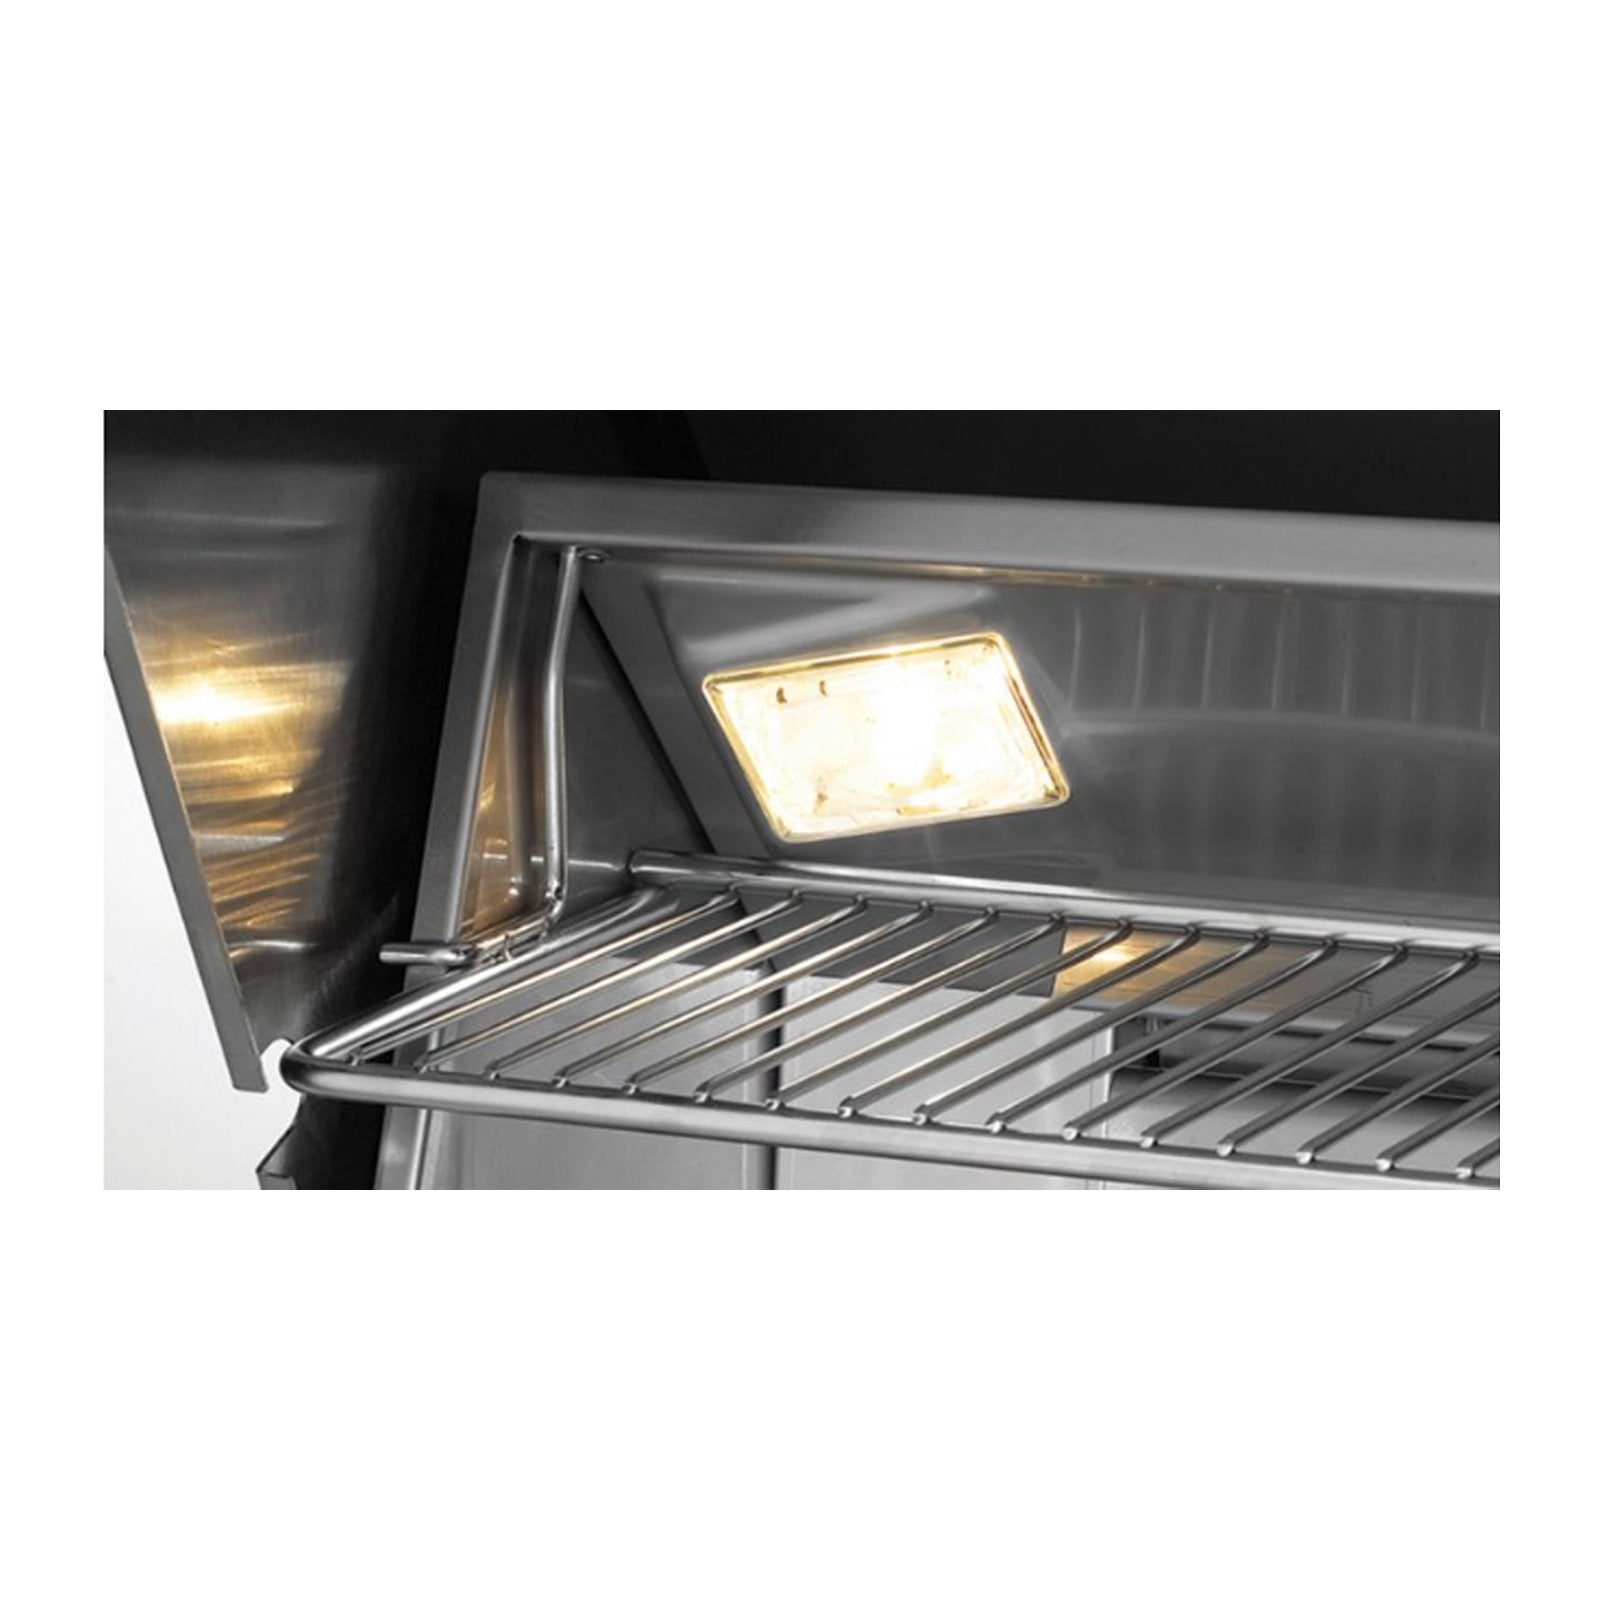 fire-magic-aurora-a430i-24-inch-built-in-grill-with-rotis-and-analog-thermometer 7